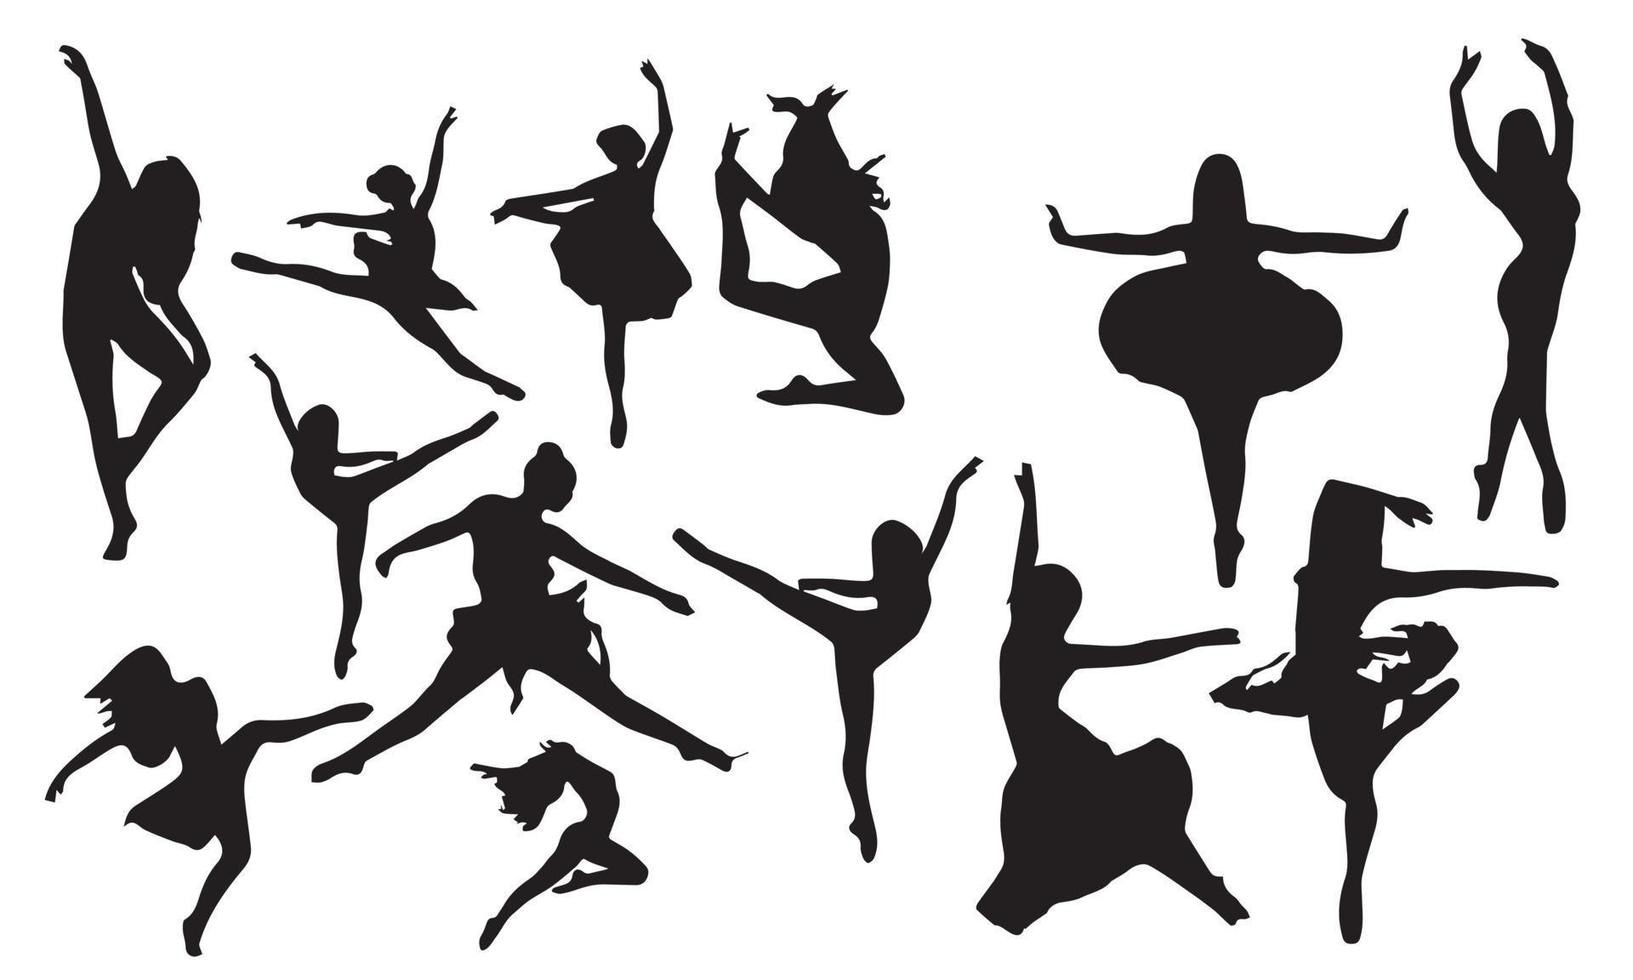 Silhouettes of beautiful women dancing black and white background vector